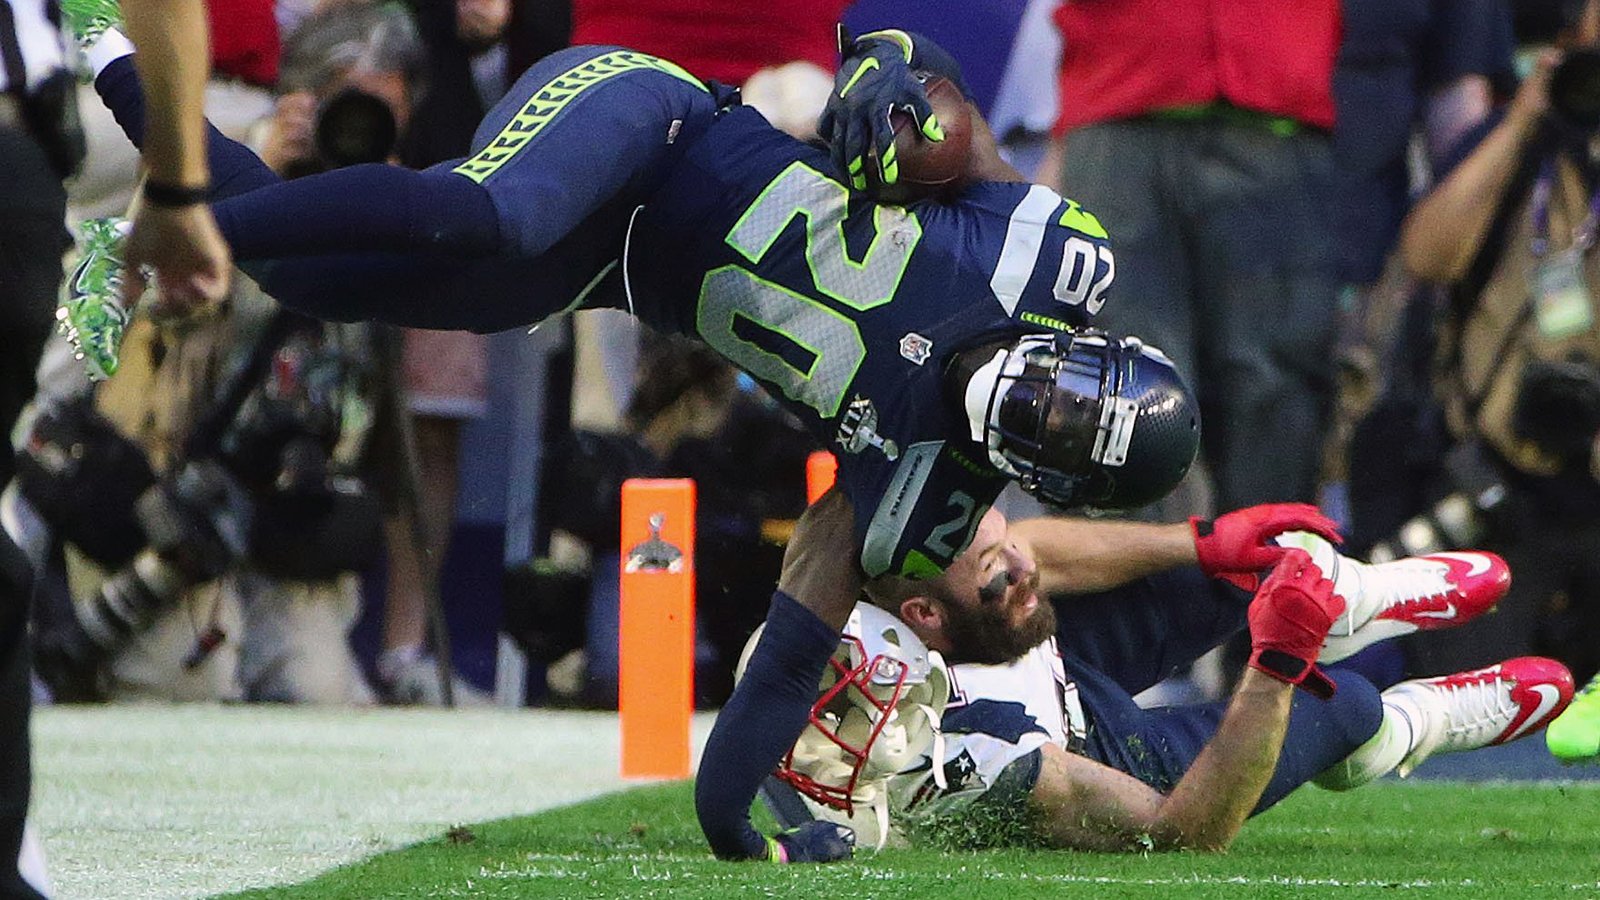 Where author Excrement Game-changing plays of Super Bowl XLIX